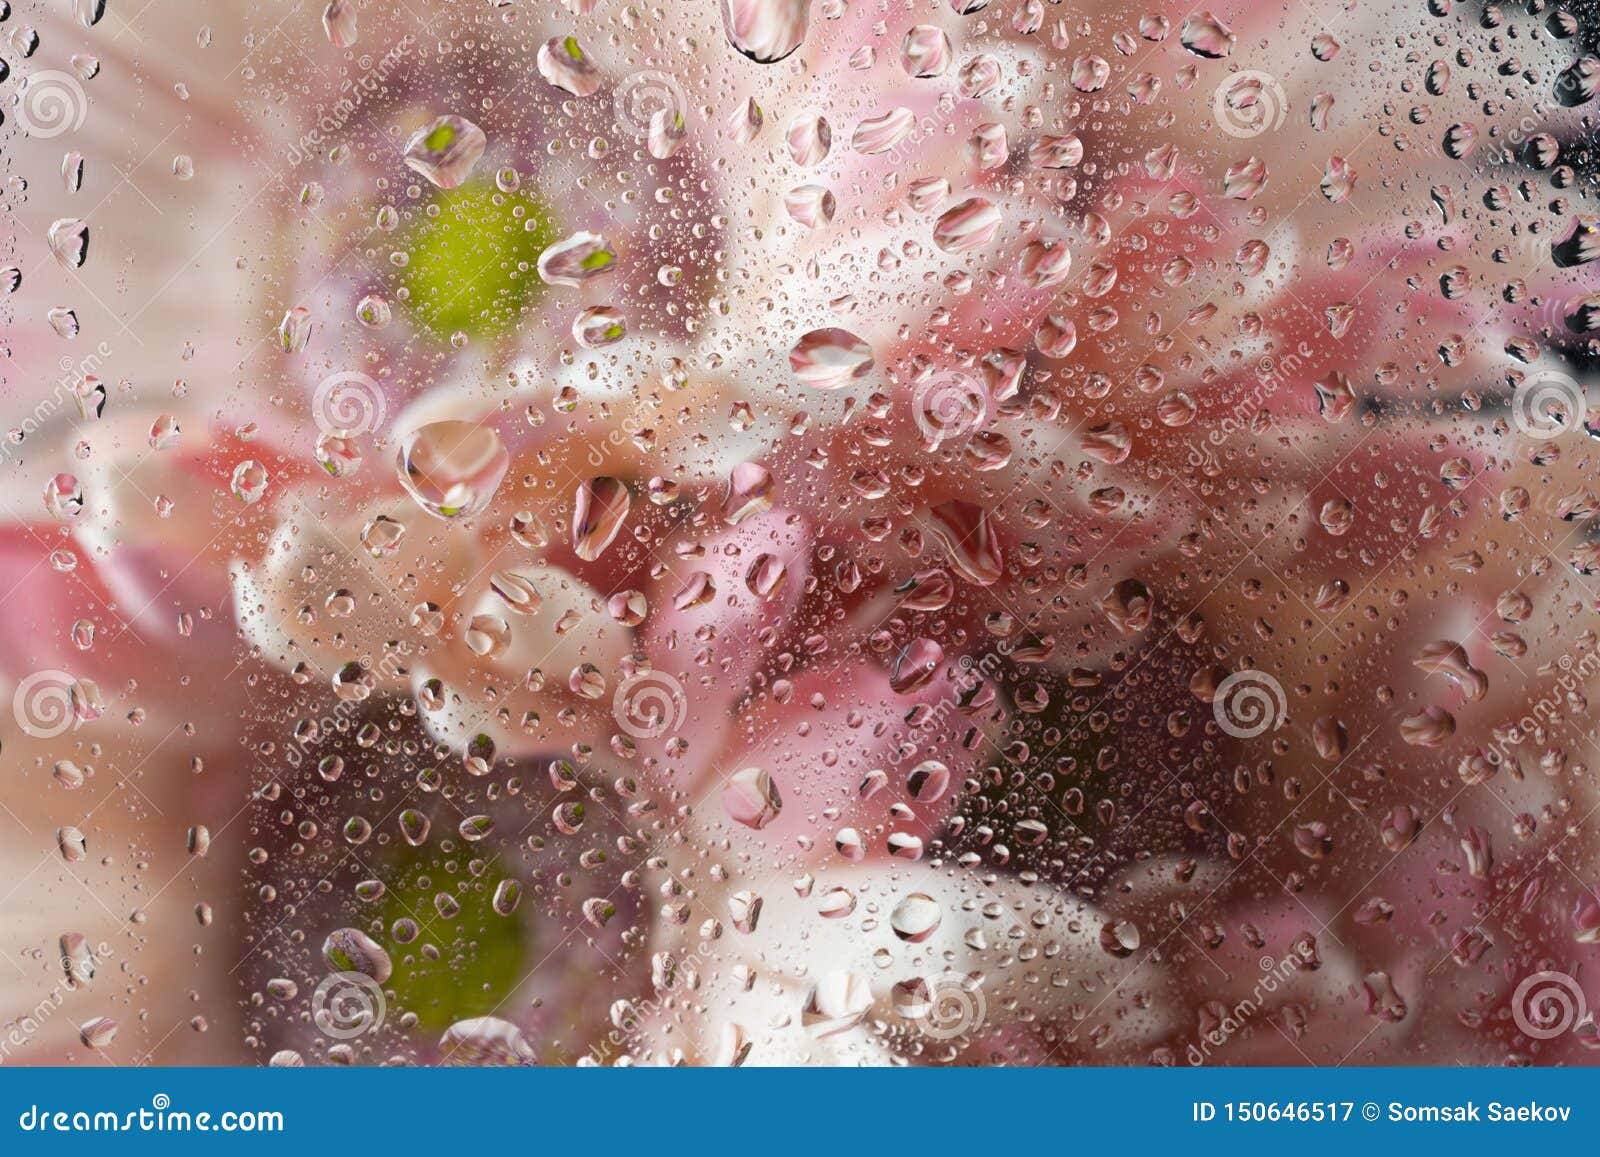 Flower and Raindrops on the Glass Stock Image - Image of wallpaper,  raindrops: 150646517